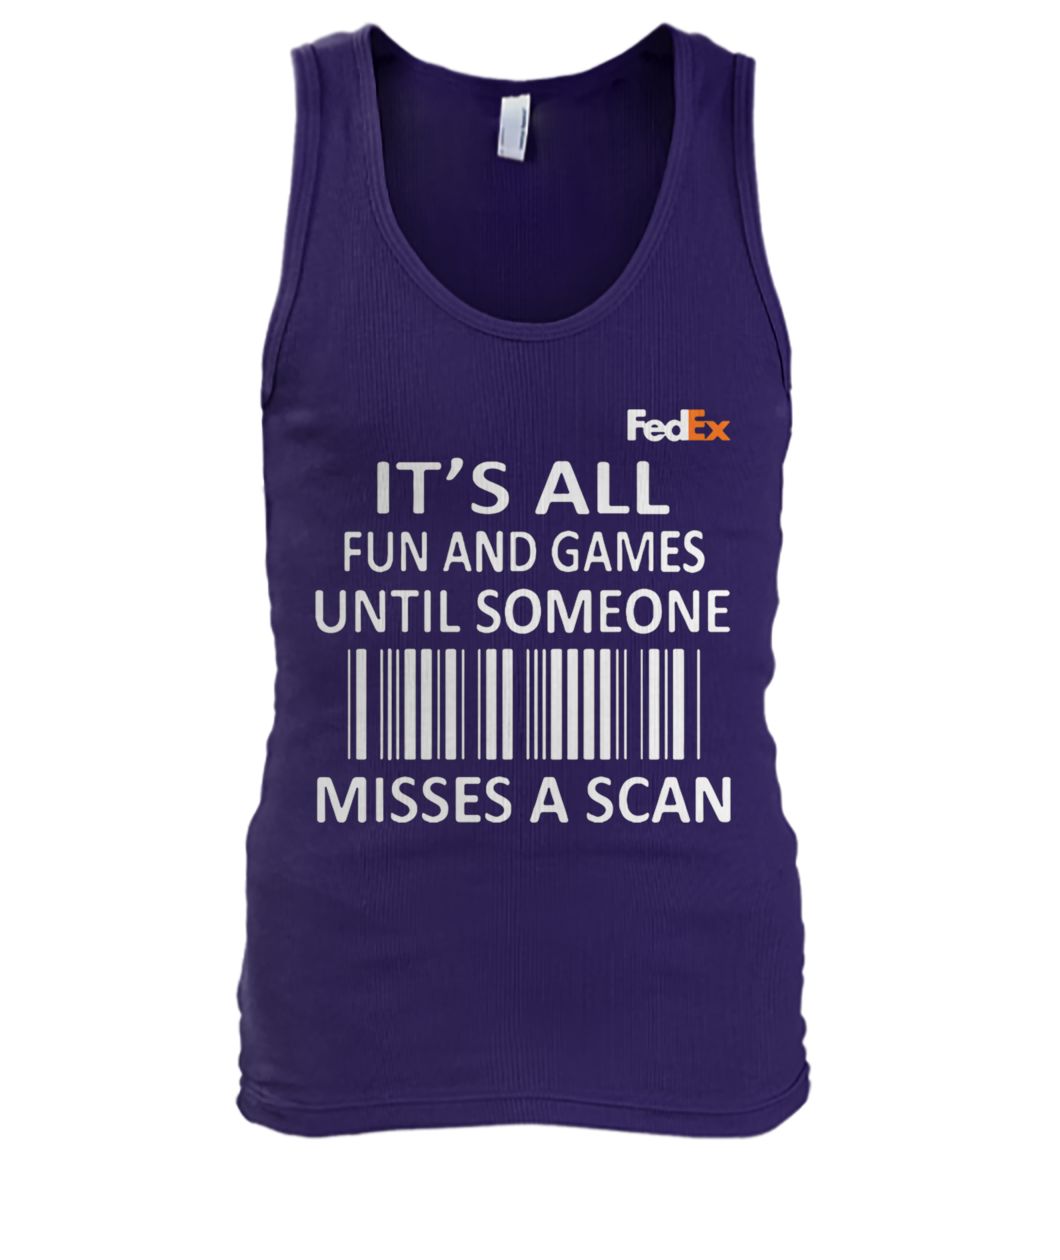 FedEx it’s all fun and games until someone misses a scan tank top